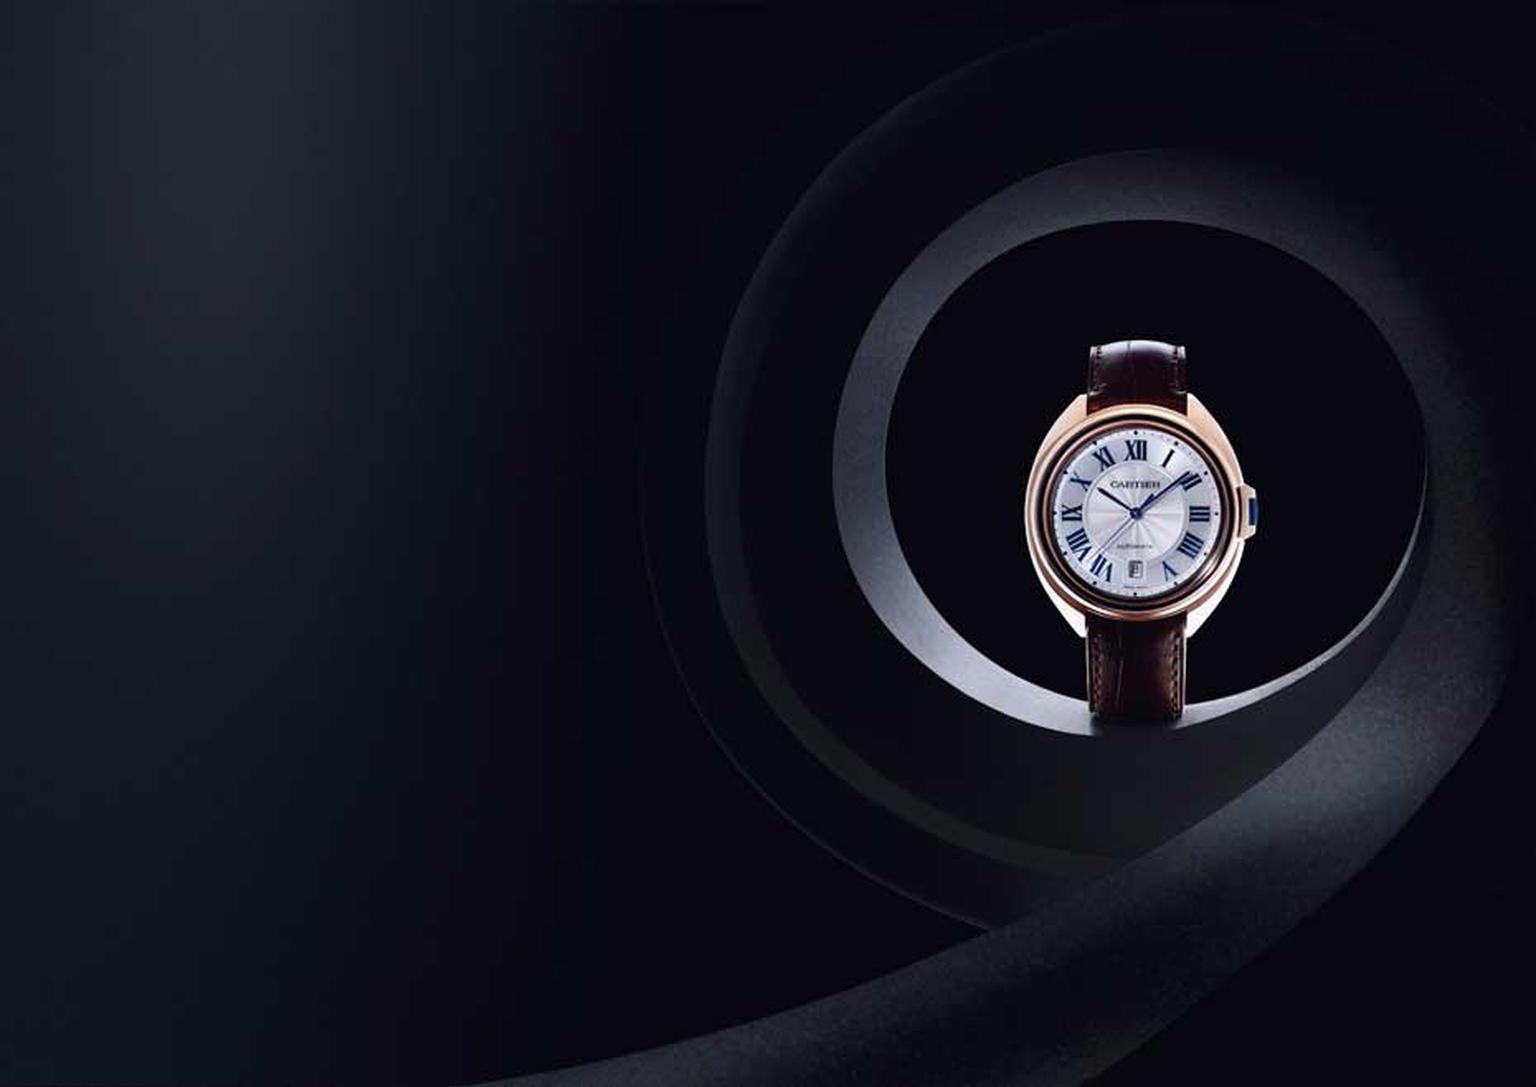 The challenge set by Cartier's designers was to create a new case based on a perfect circle.  (Eric Maillet © Cartier)